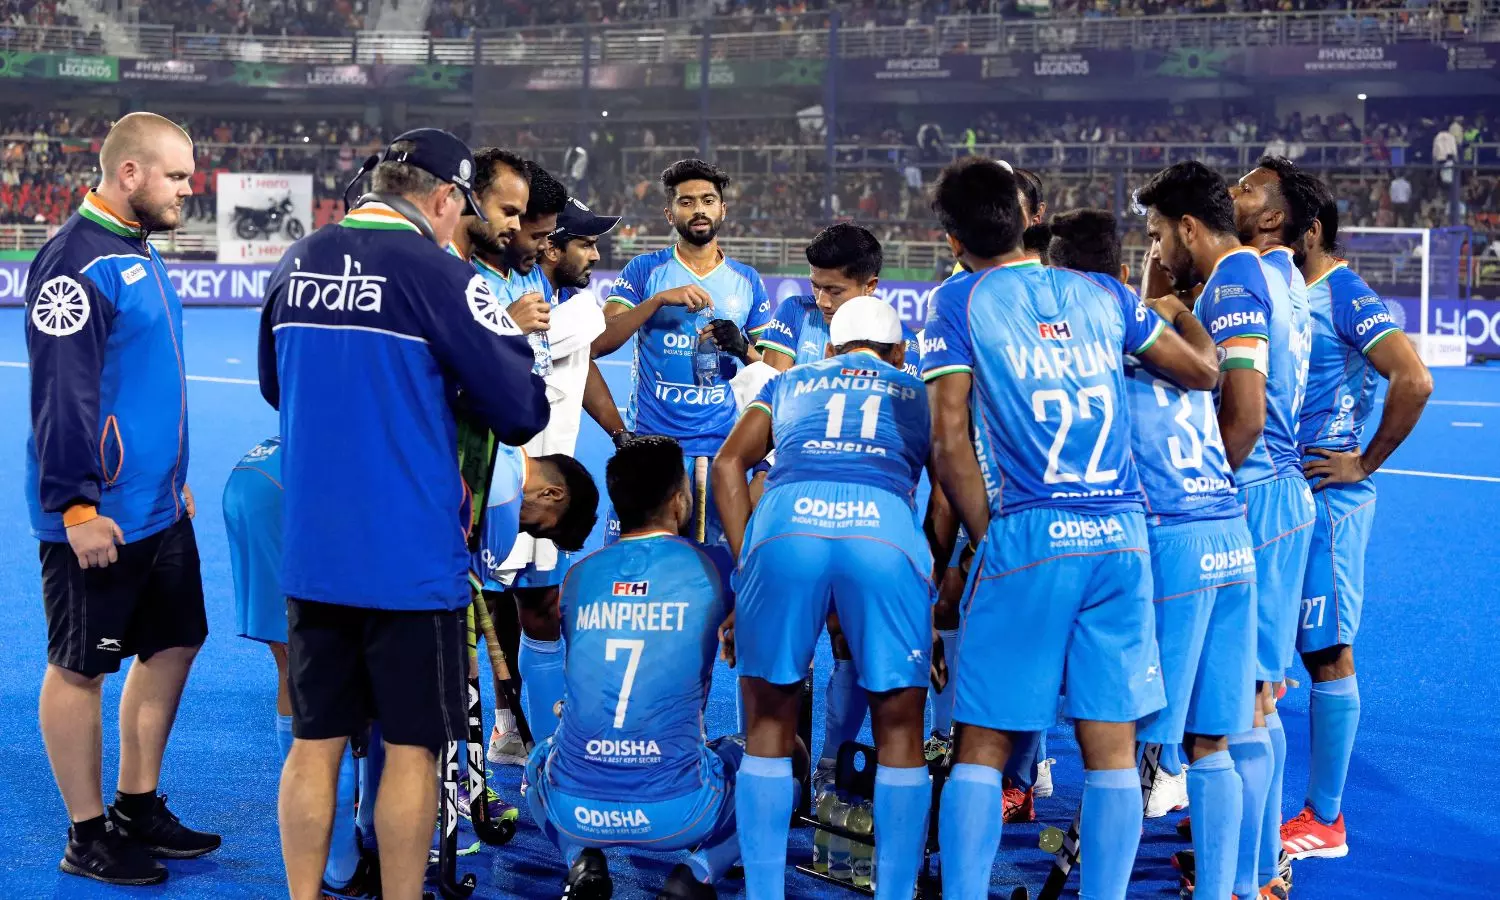 FIH Pro League India returns to action under new coach